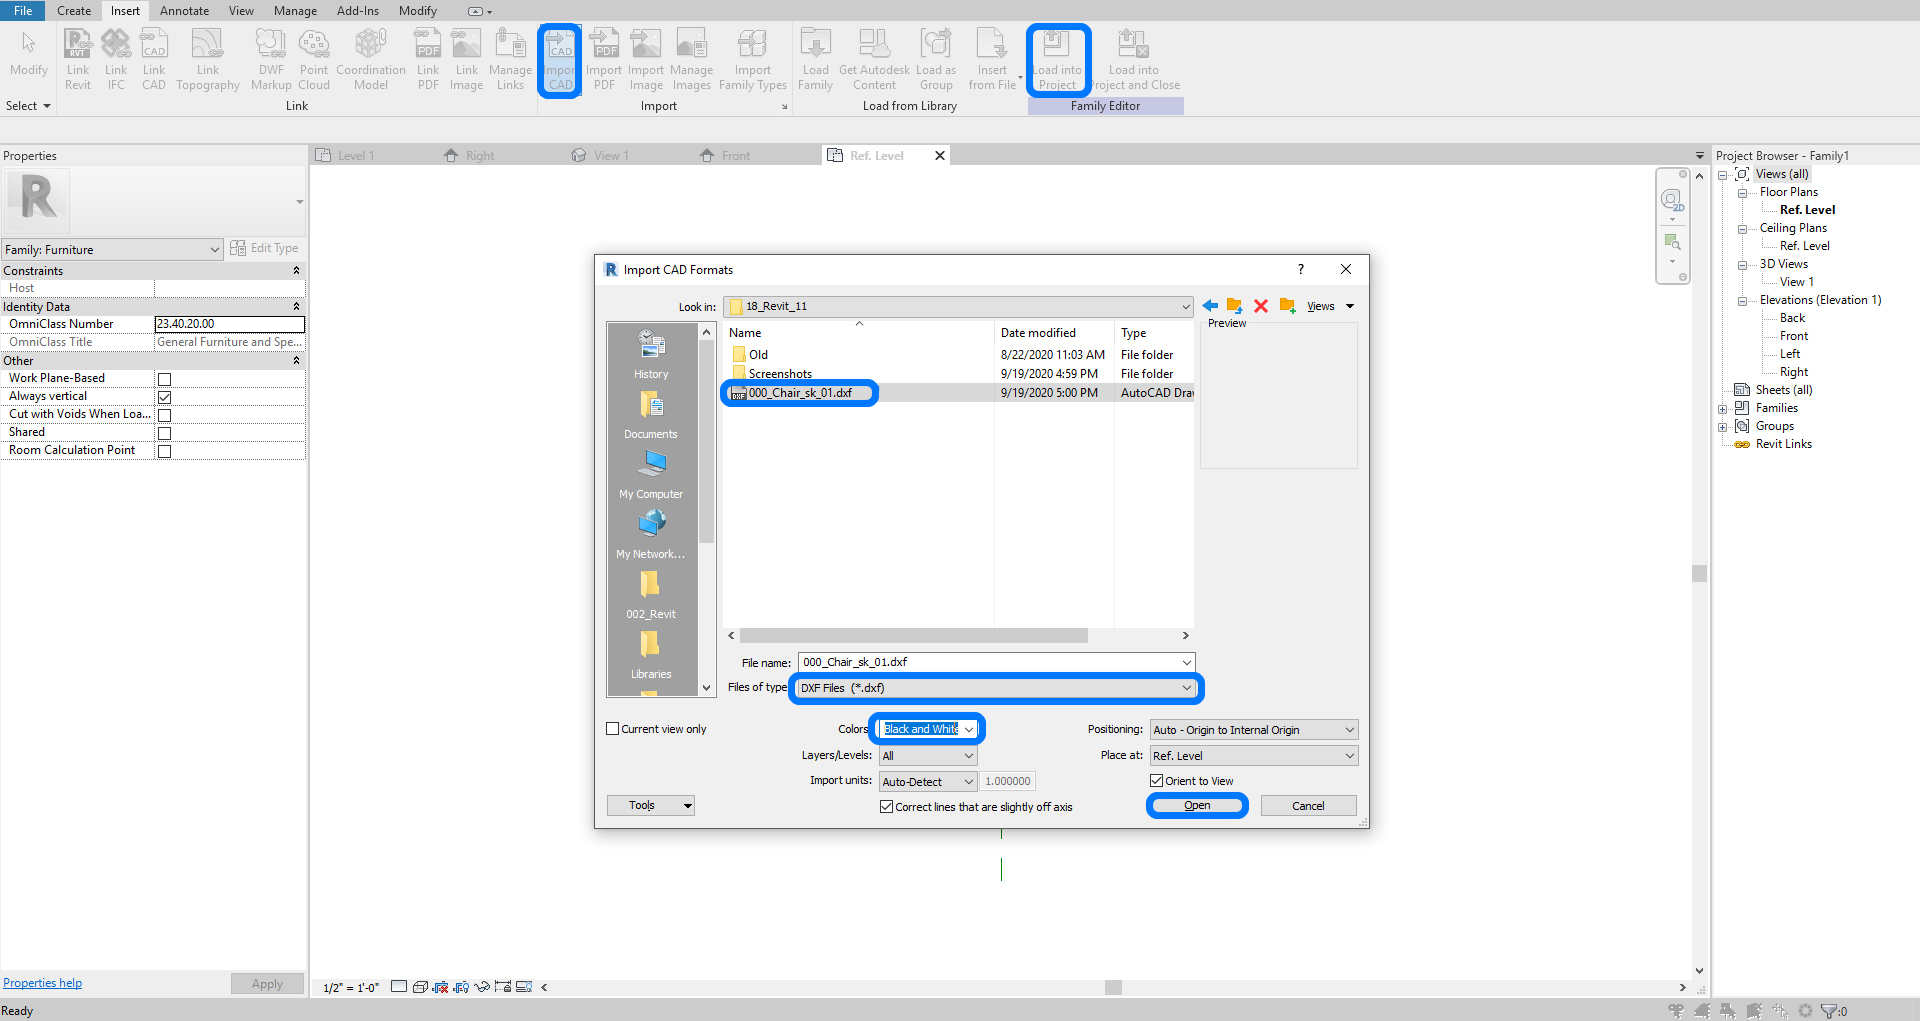 It indicates how to import the dxf file to Revit.